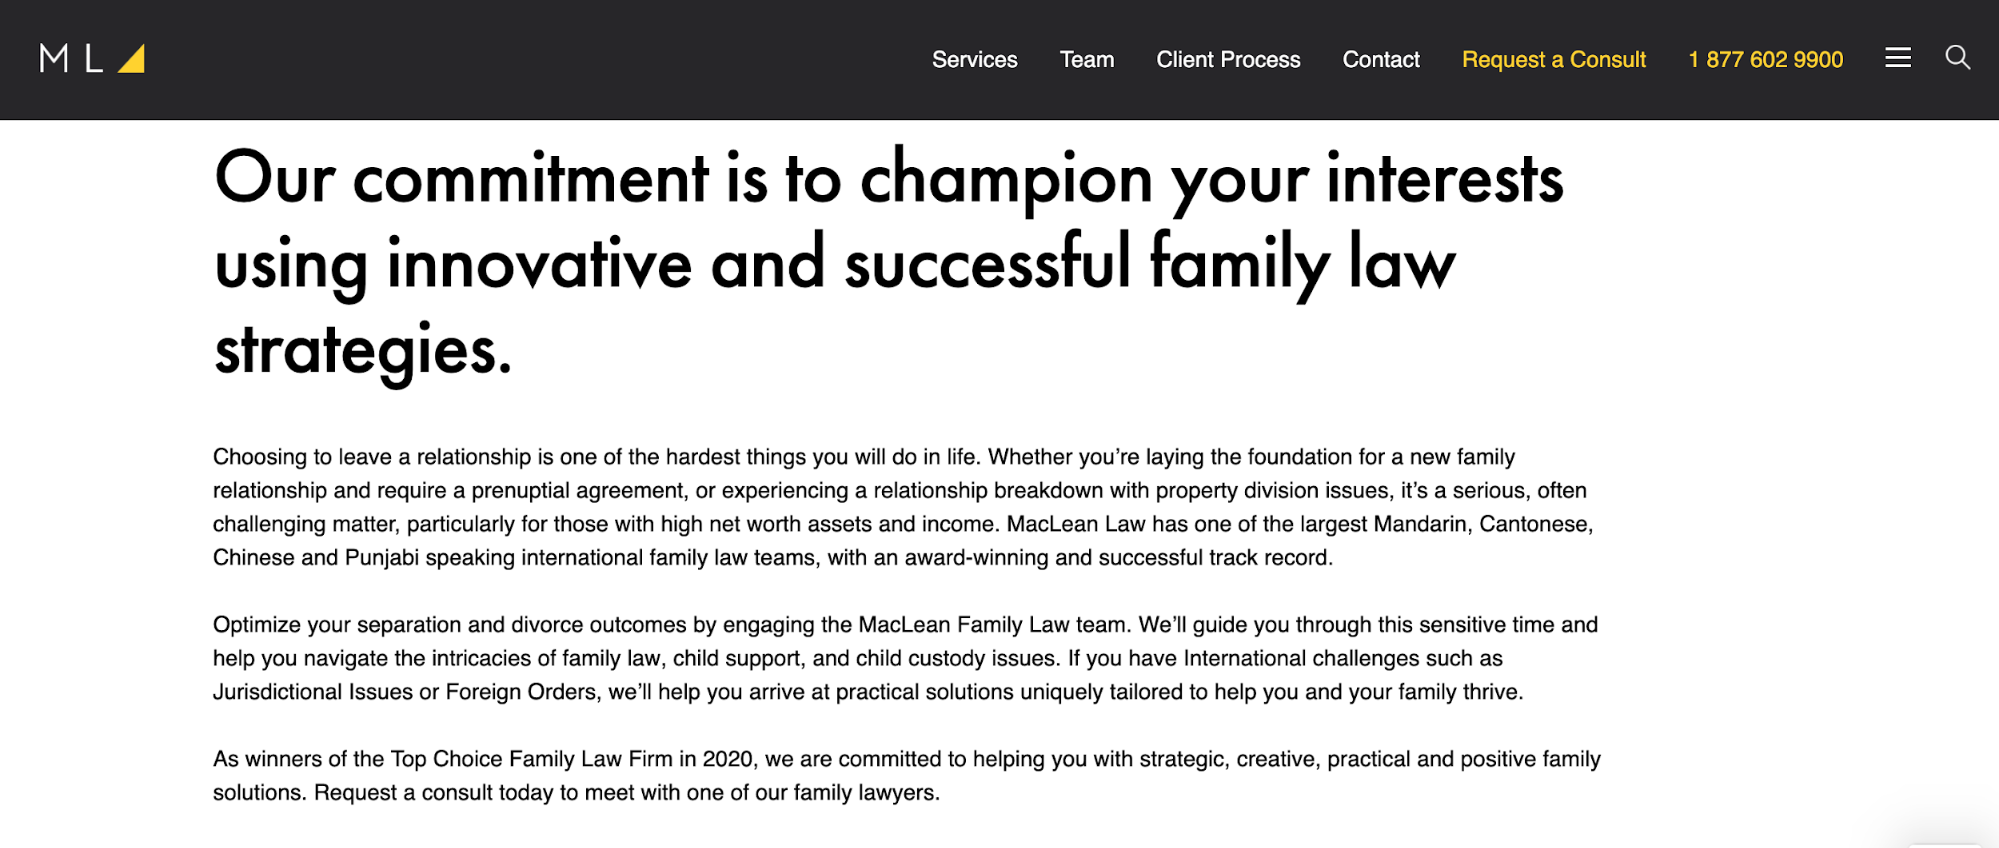 MacLean Law Firm uses emotive content writing